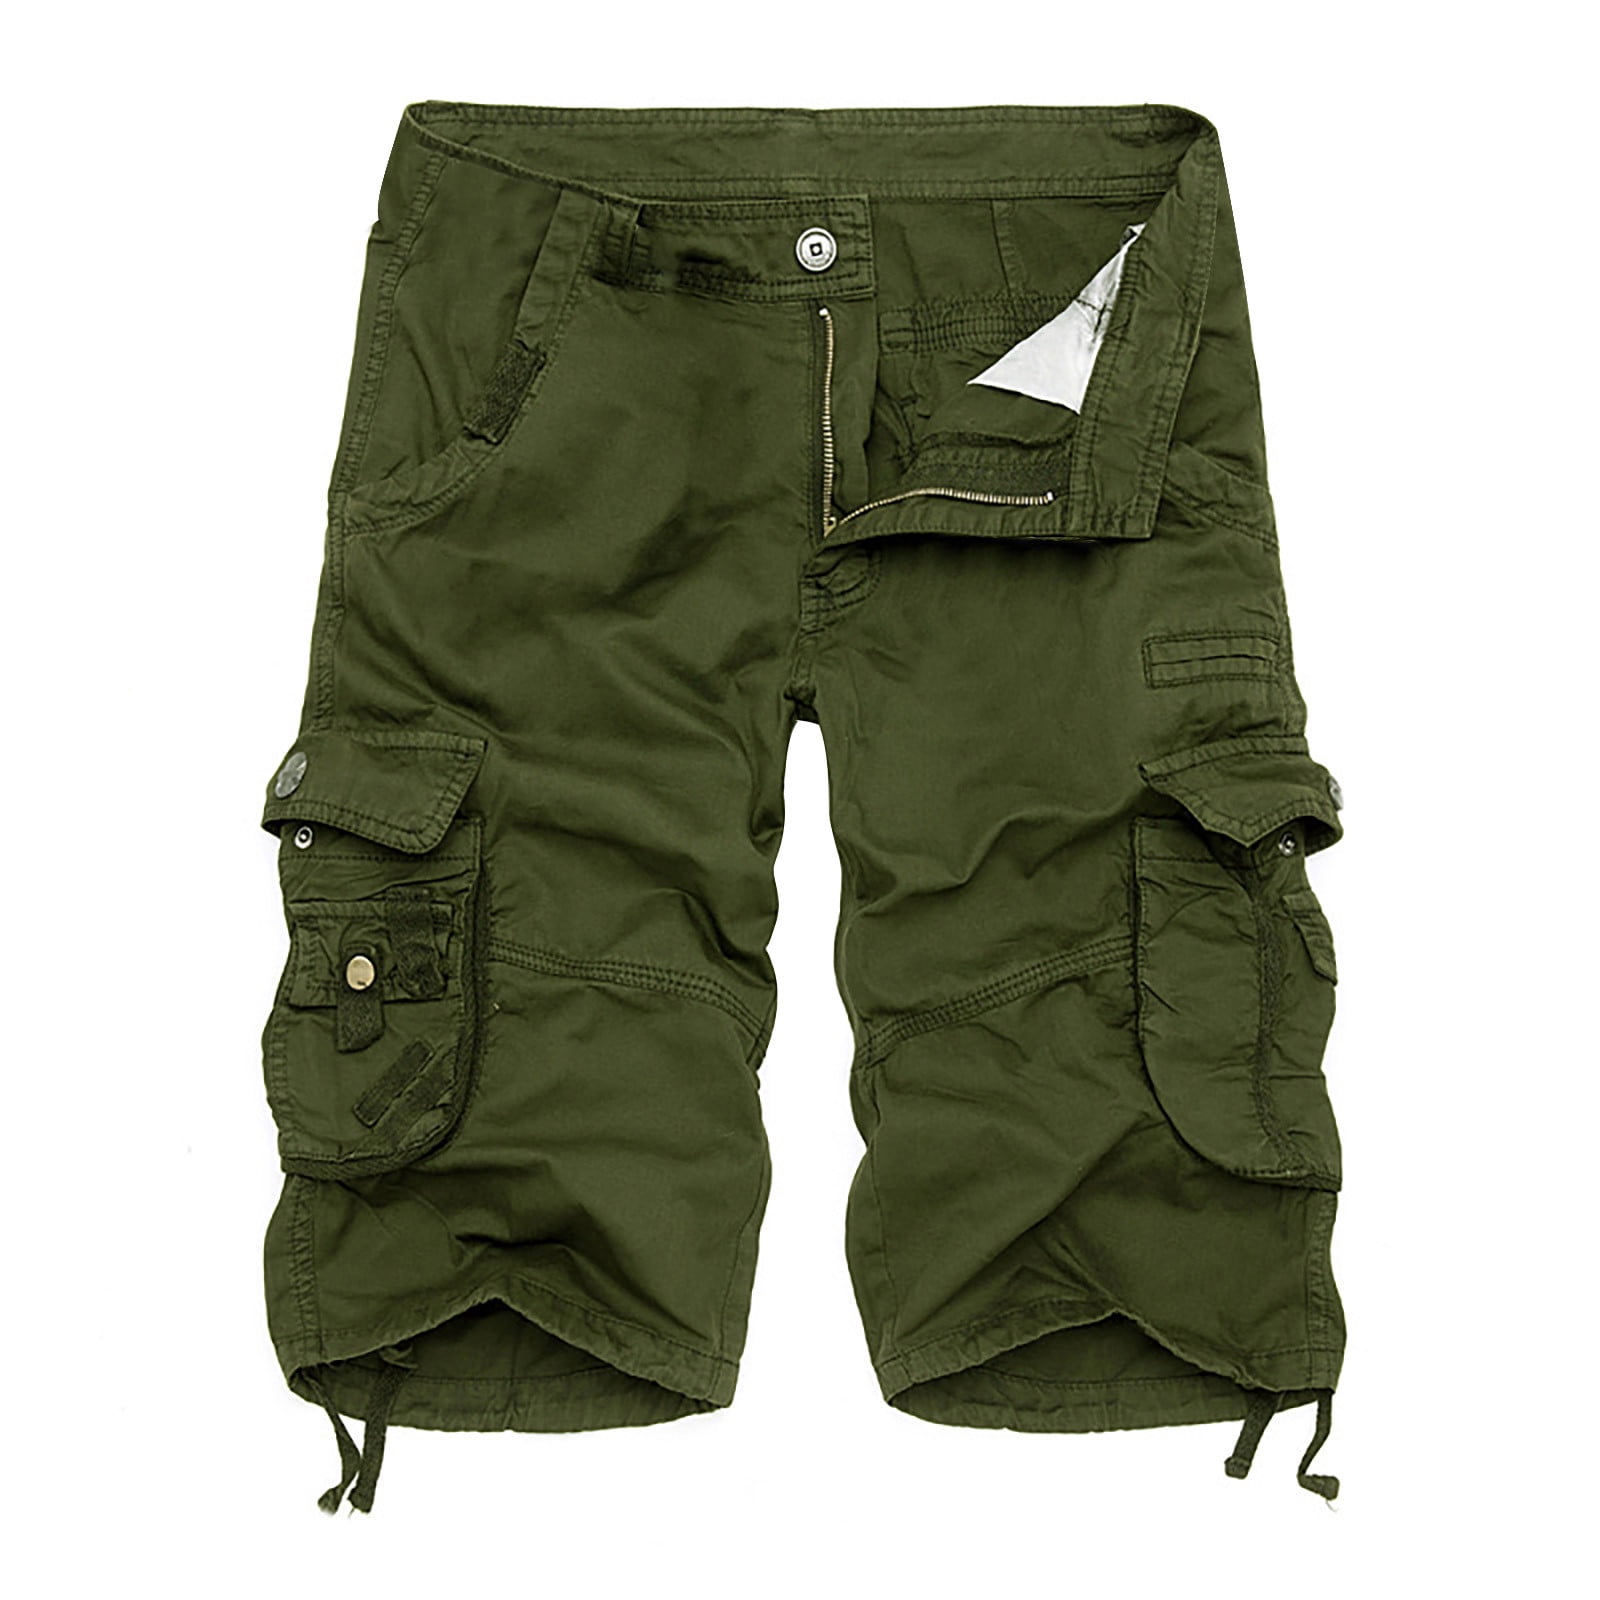 YYDGH Shorts for Men Cargo Shorts Summer Casual Lightweight Tactical ...